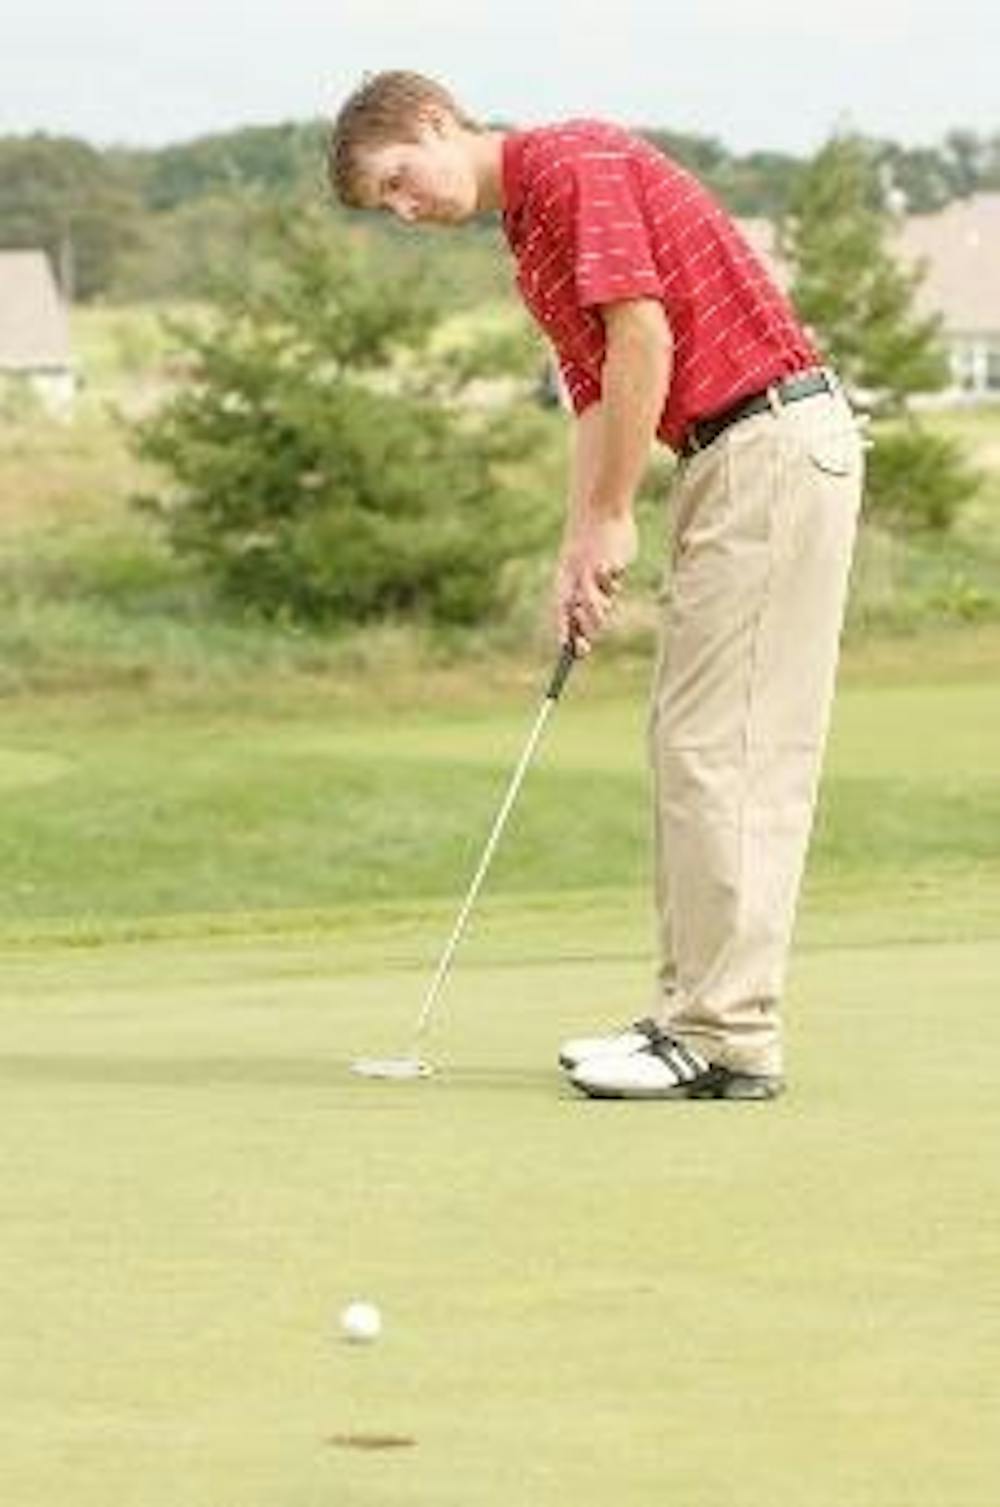 Sophomore Ben Bastel is a master of the short game according to his fellow Miami teammates.